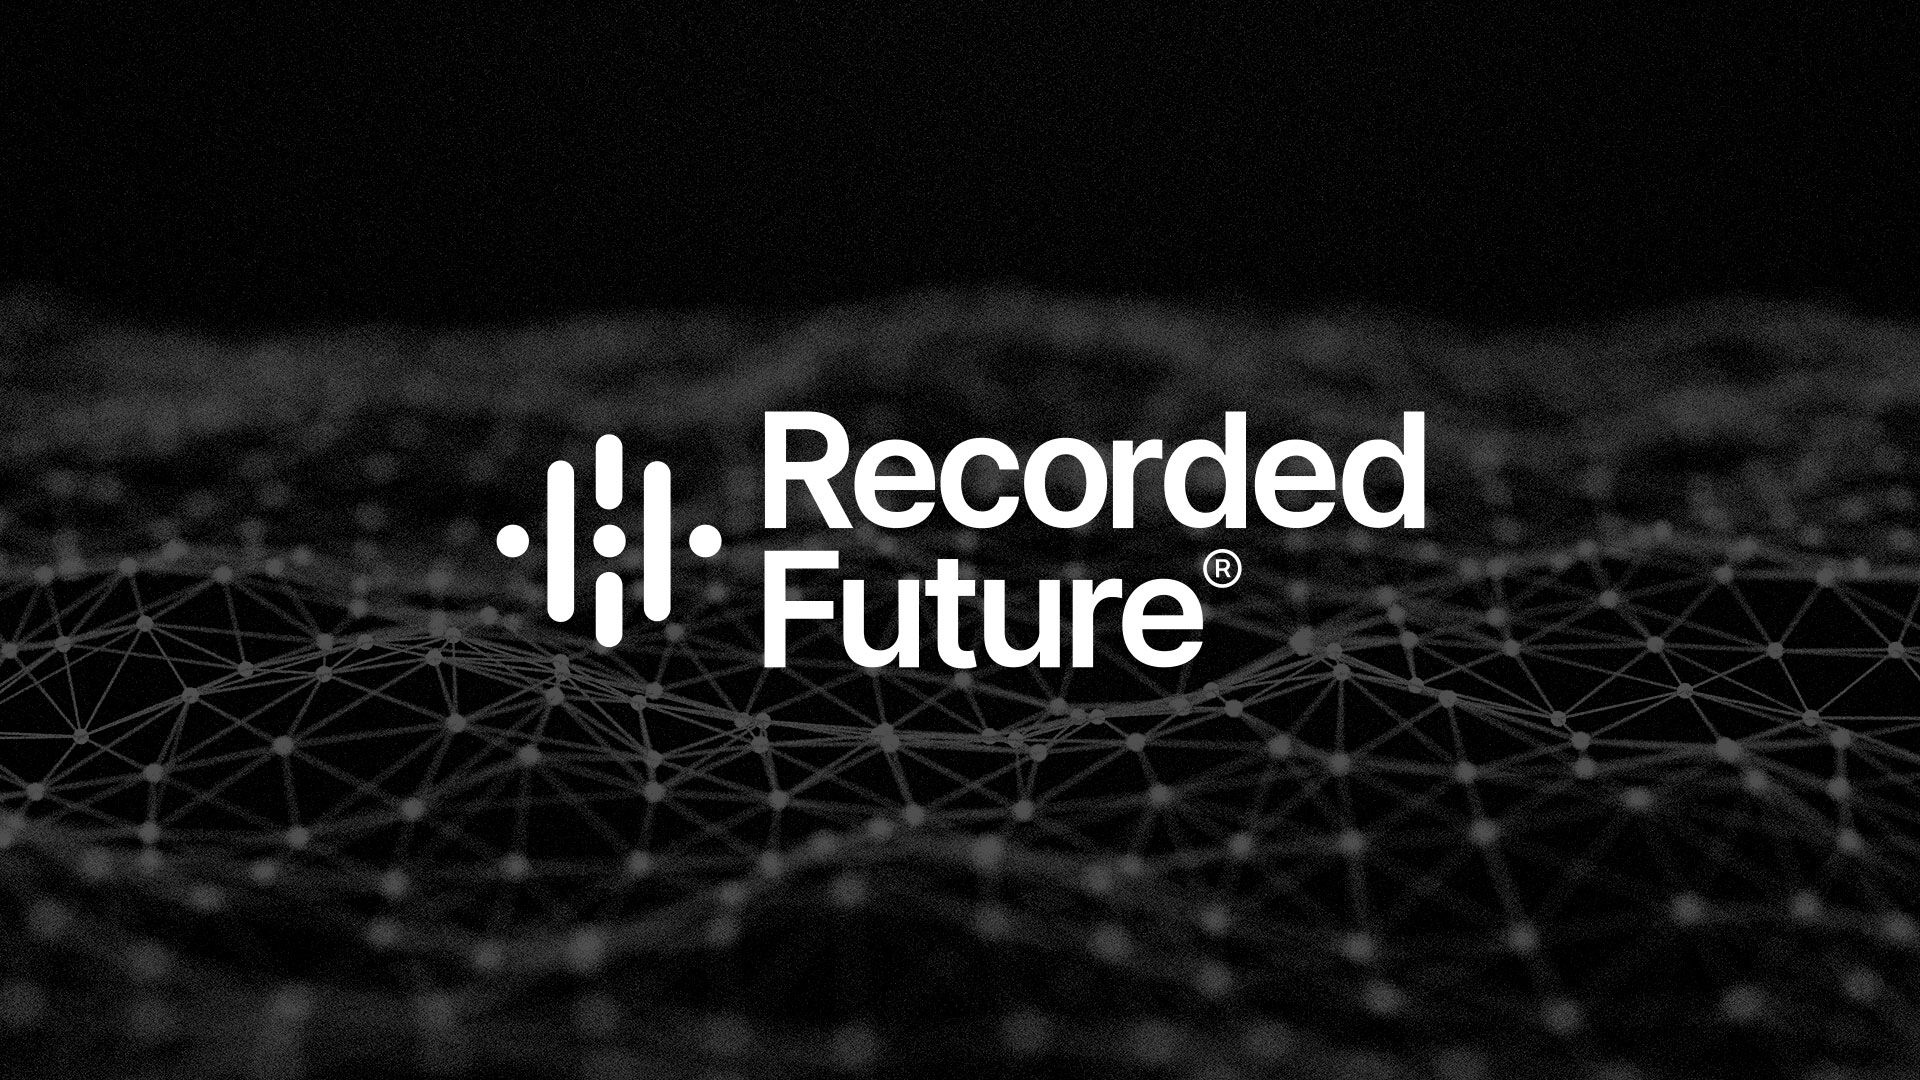 Recorded Future to Participate in Upcoming Investor Conferences